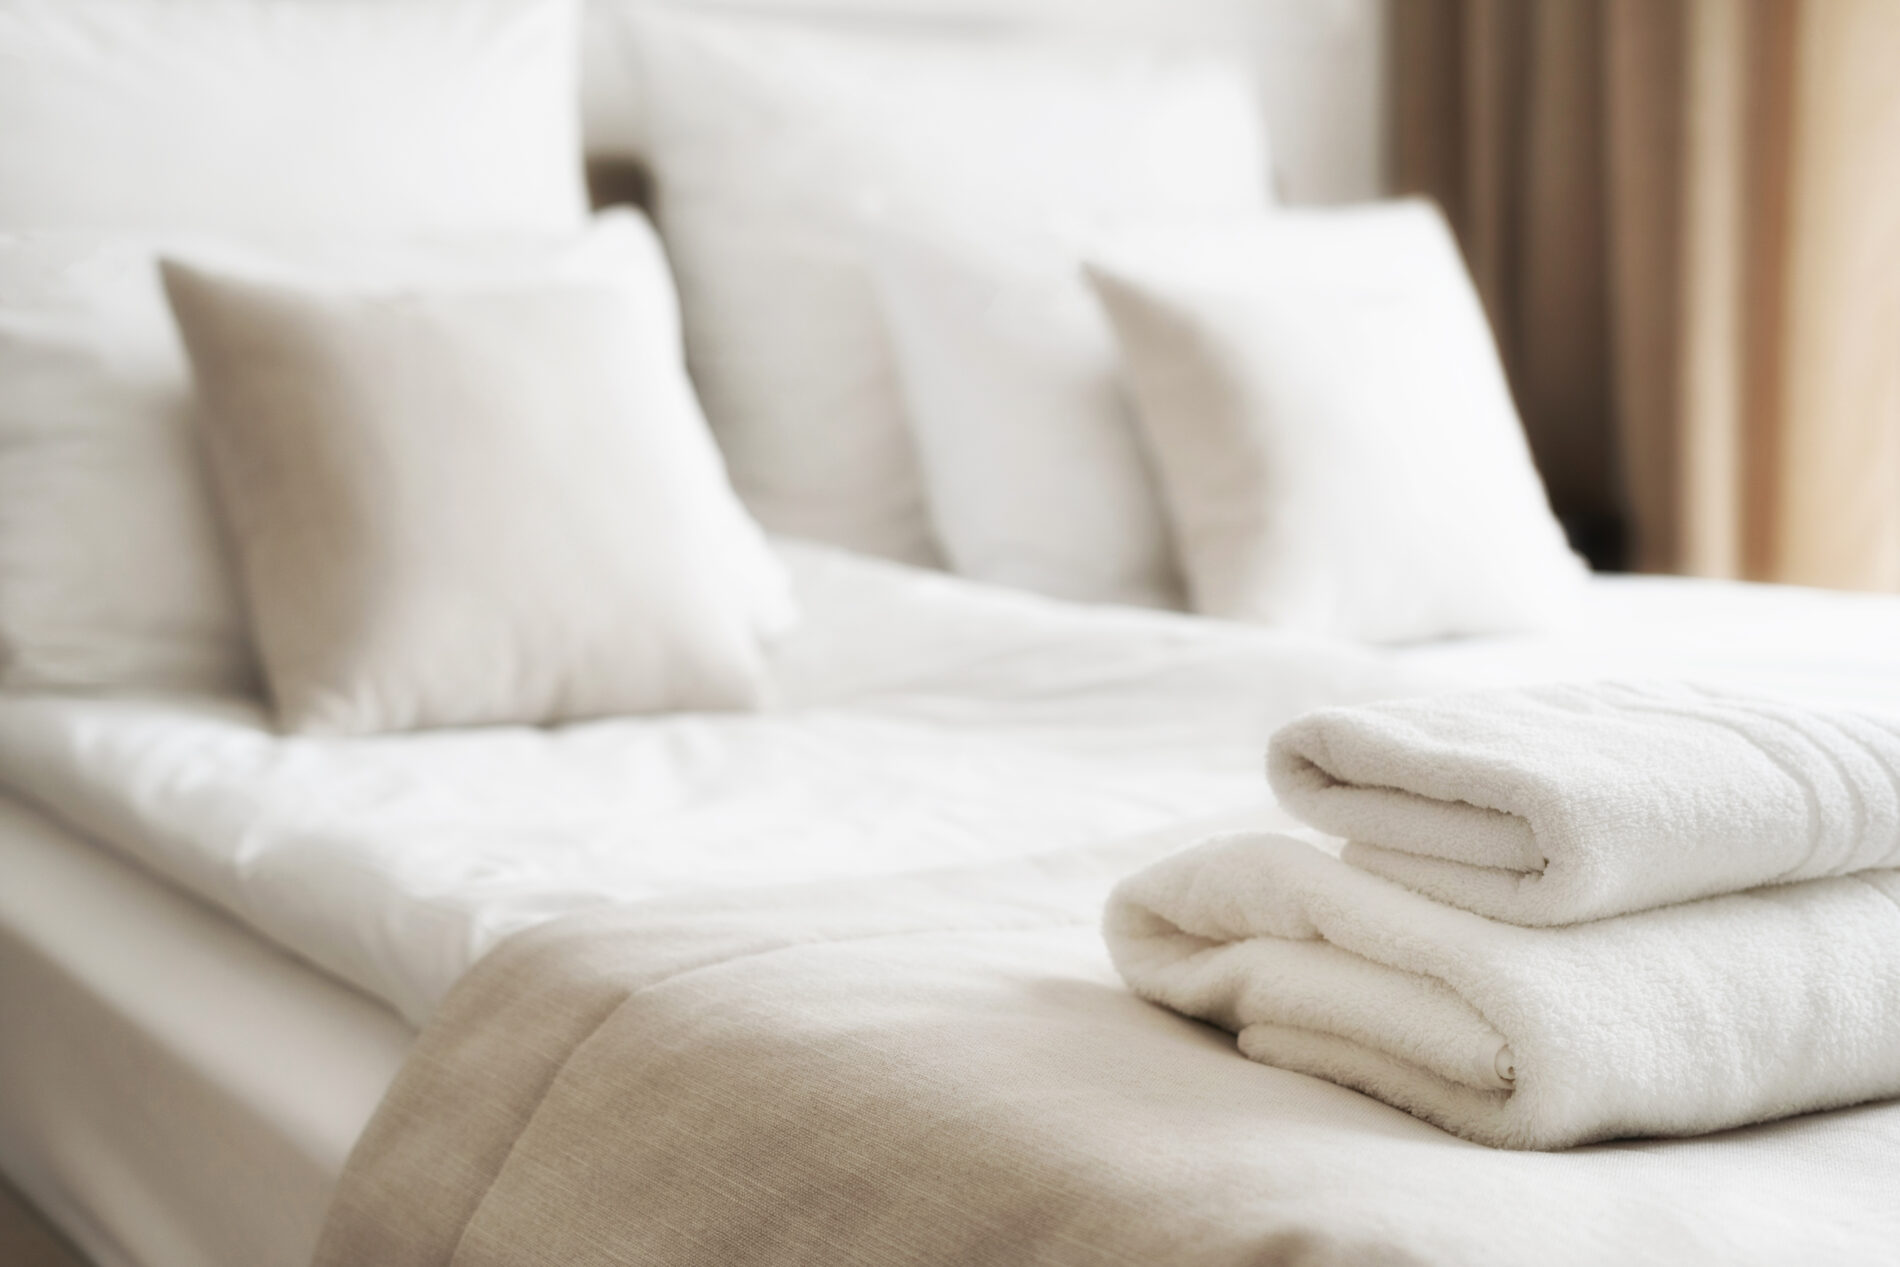 Neatly folded towels on a bed in a hotel room showcasing the meticulous habits of the staff.